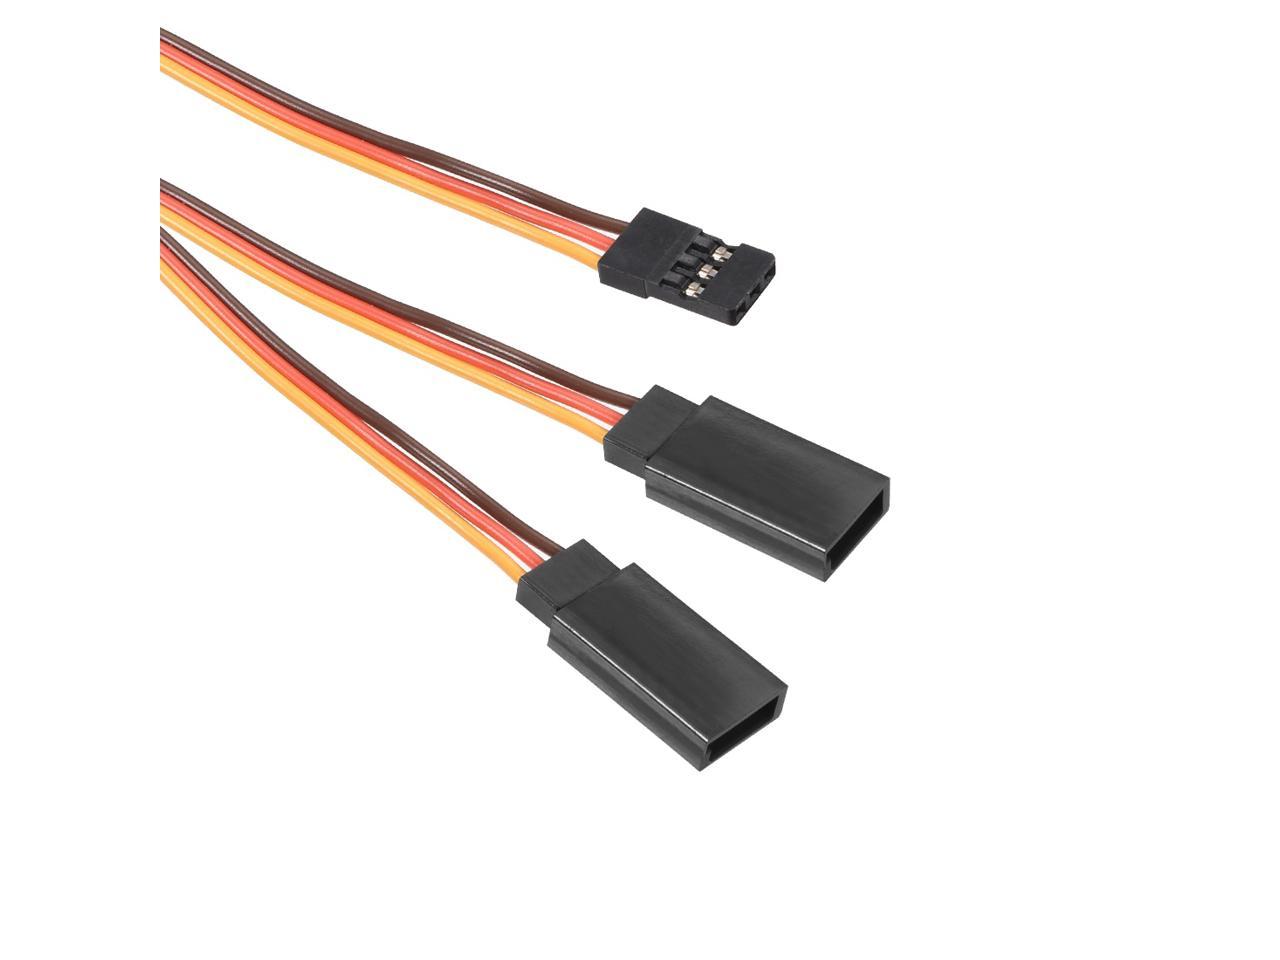 Details about   10 Pcs 15cm Y Servo Extension Cable Remote Control 1 Female to 2 Male Lead Cord